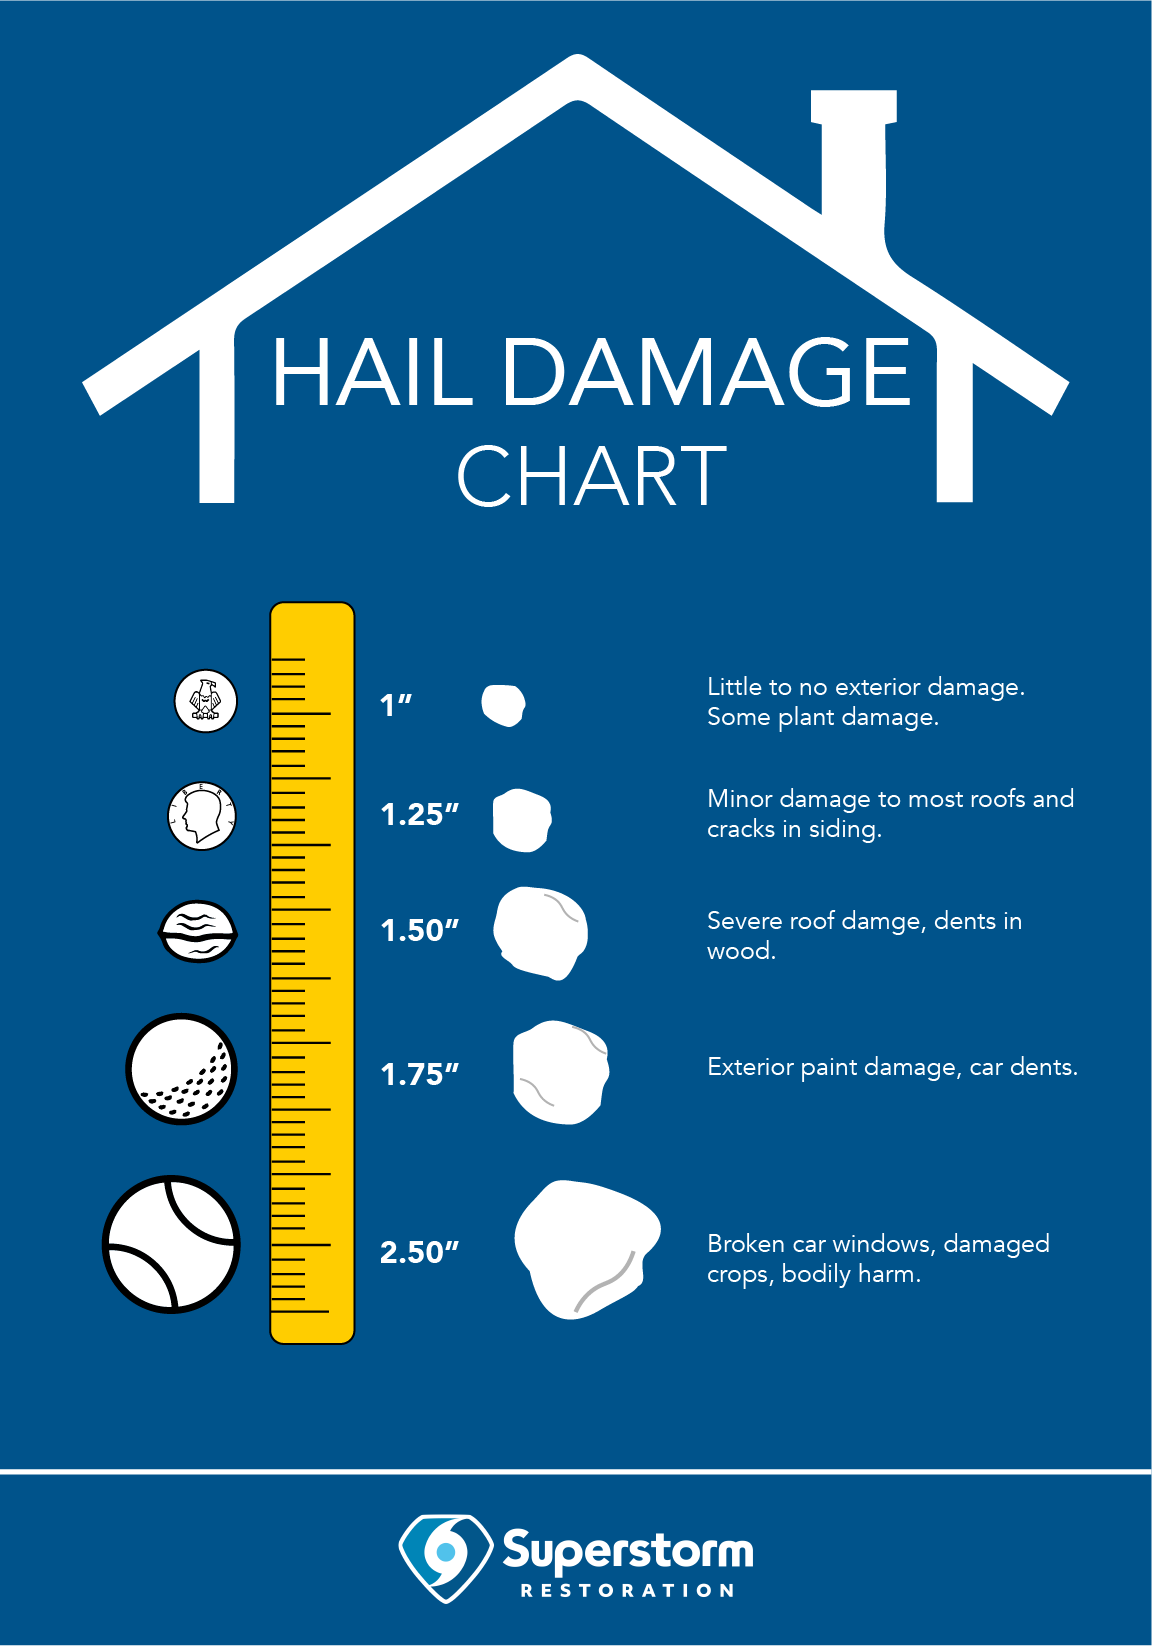 What Does Hail Roof Damage Look Like?